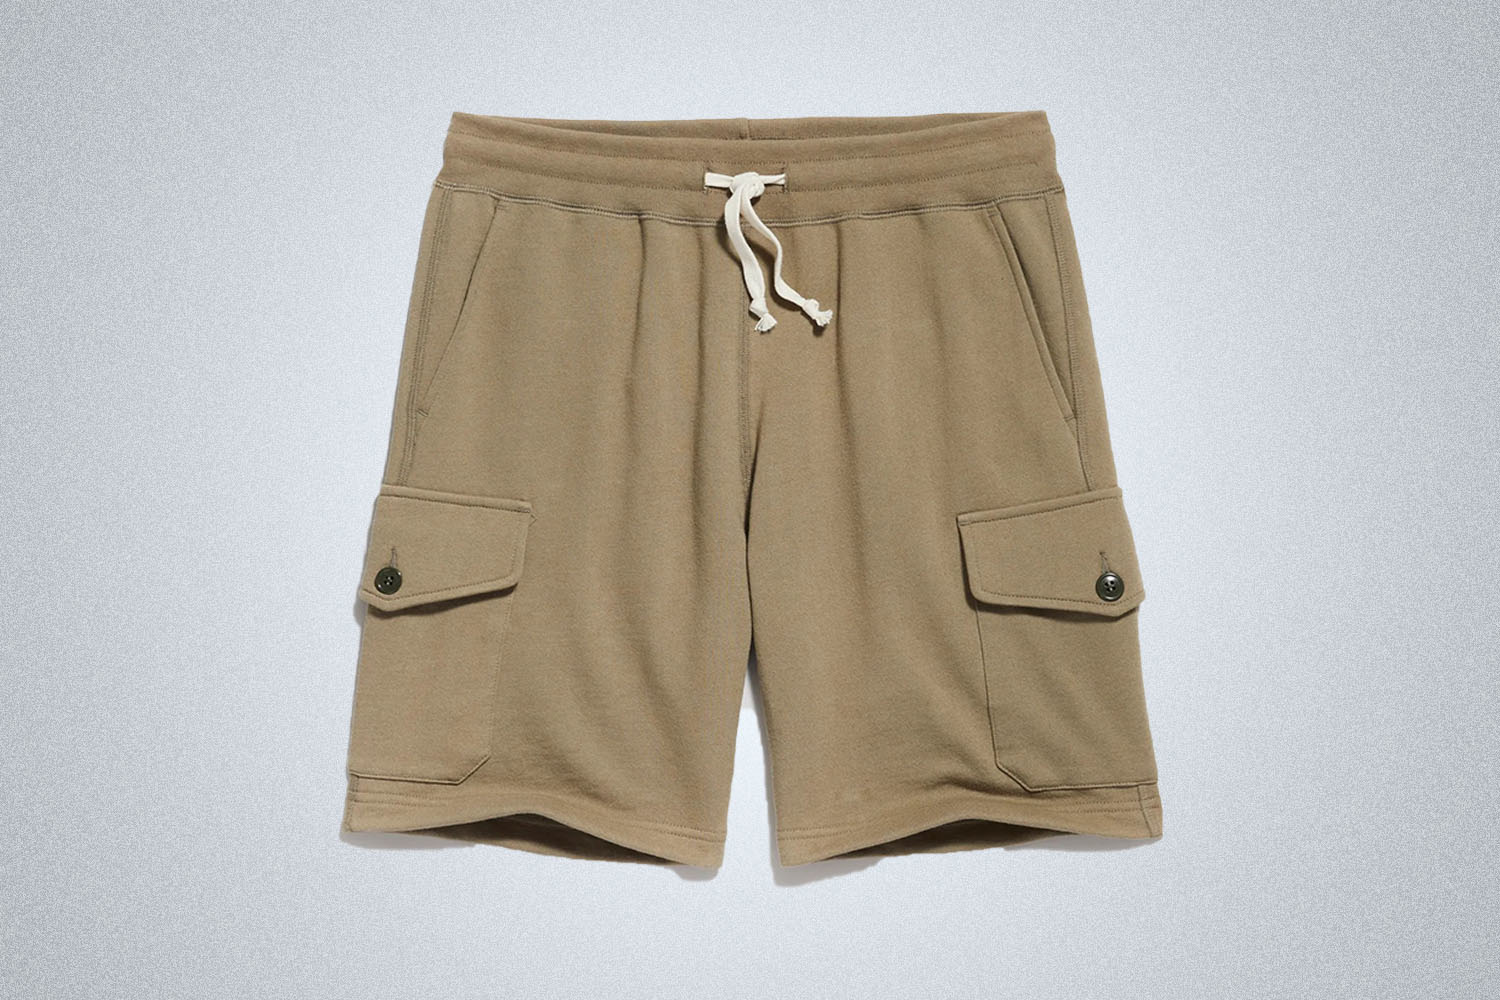 a pair of tan cargo shorts from Todd Snyder on a grey background